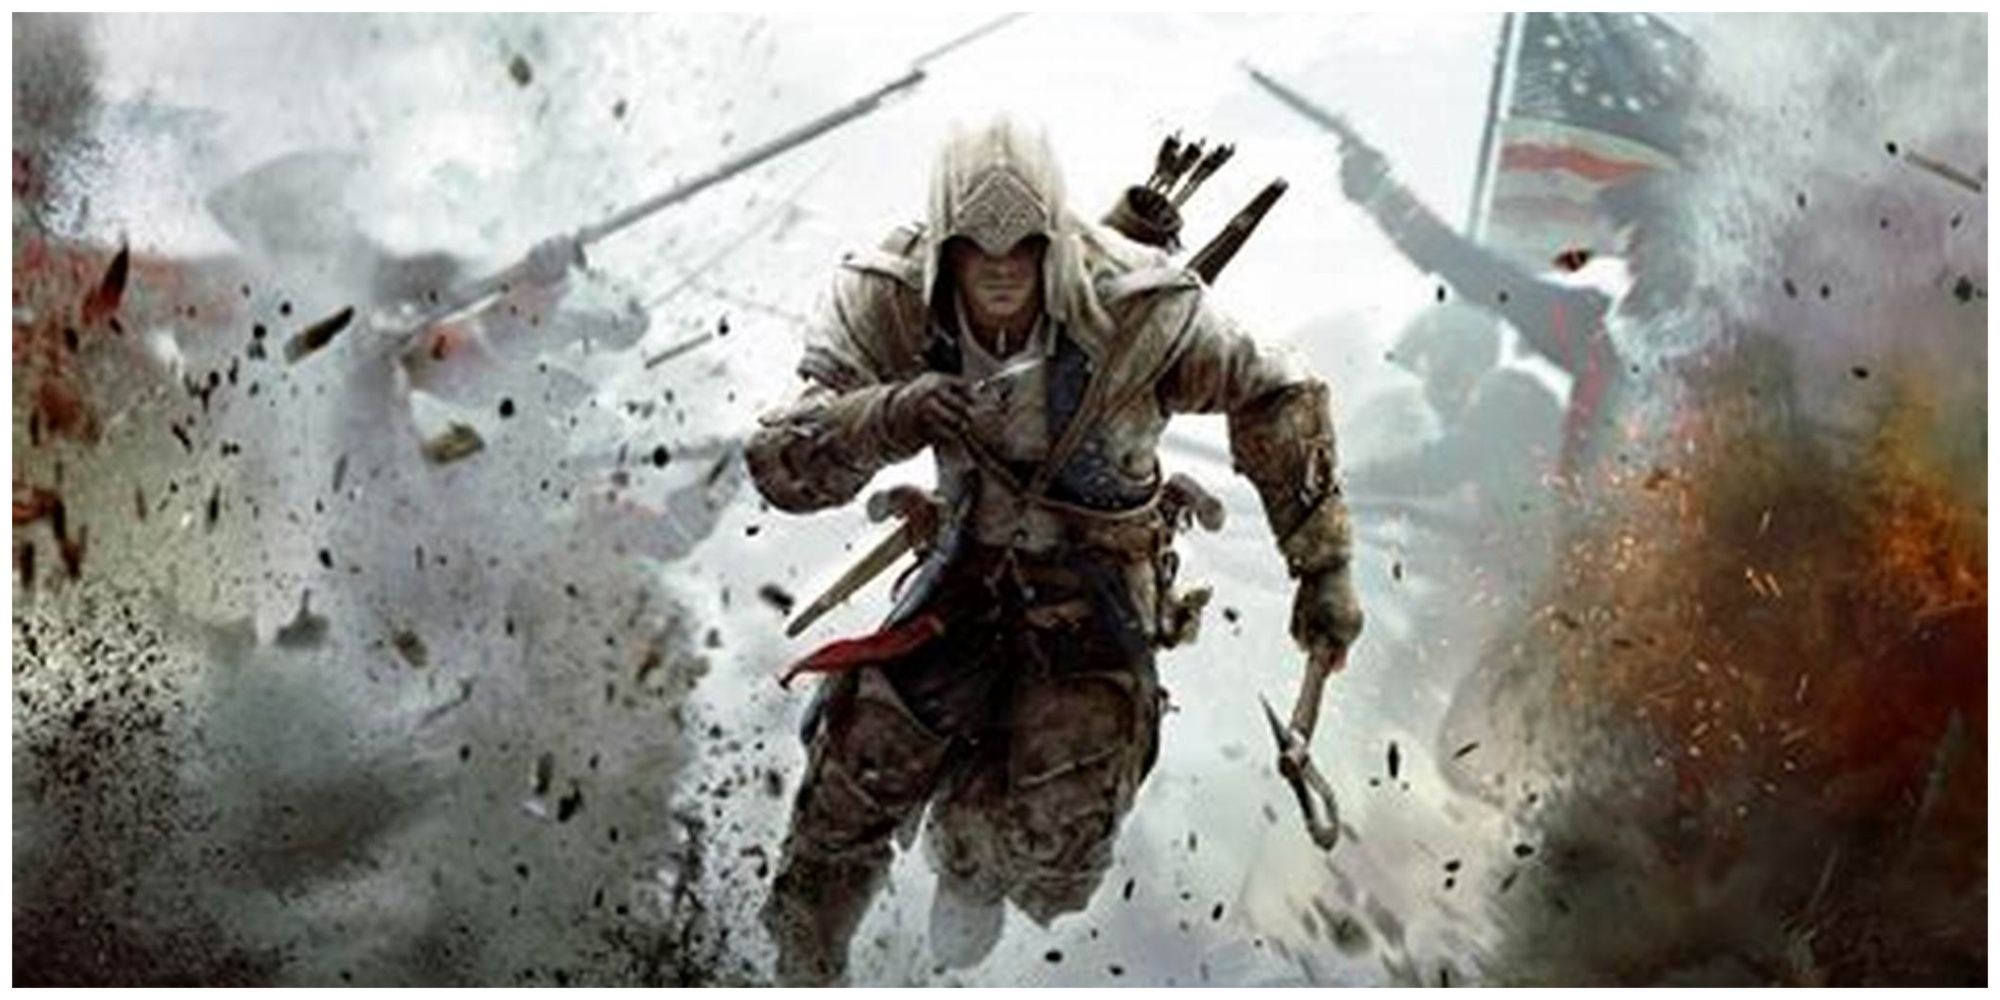 Assassins Creed 3 Connor running in the middle of a battle